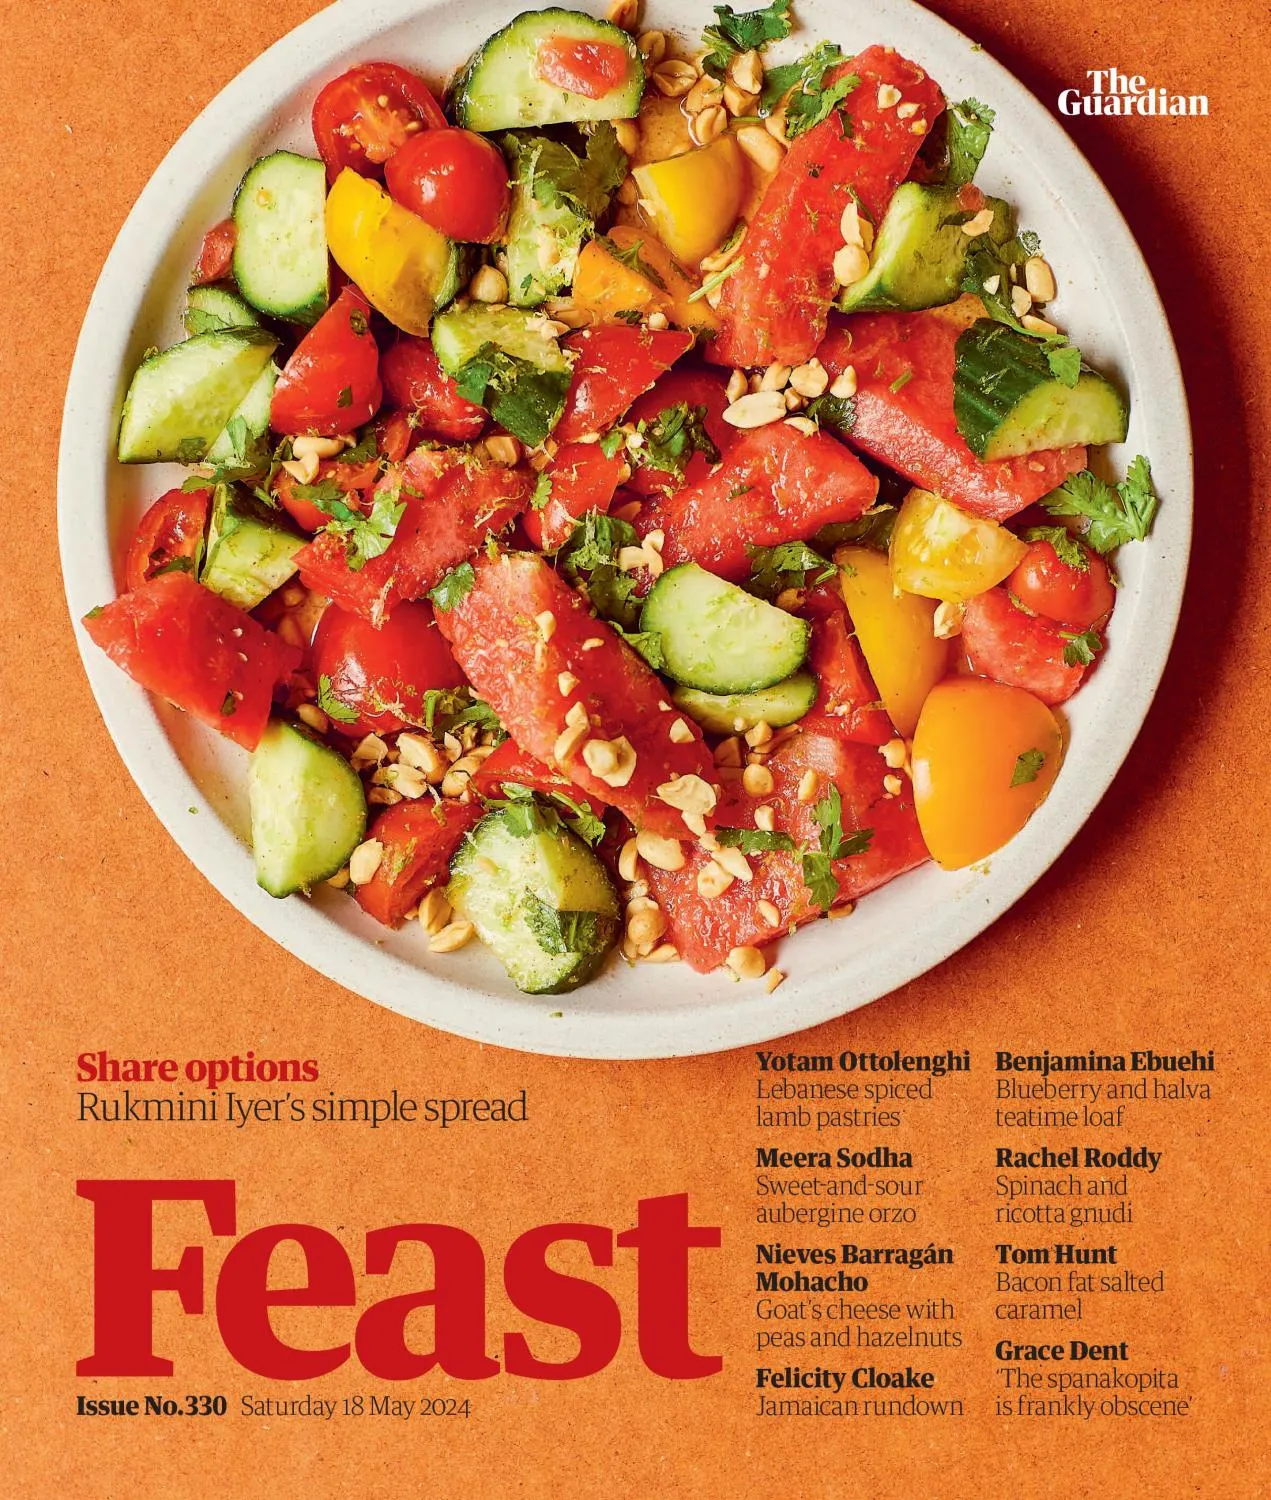 The Guardian Feast – 18 May 2024